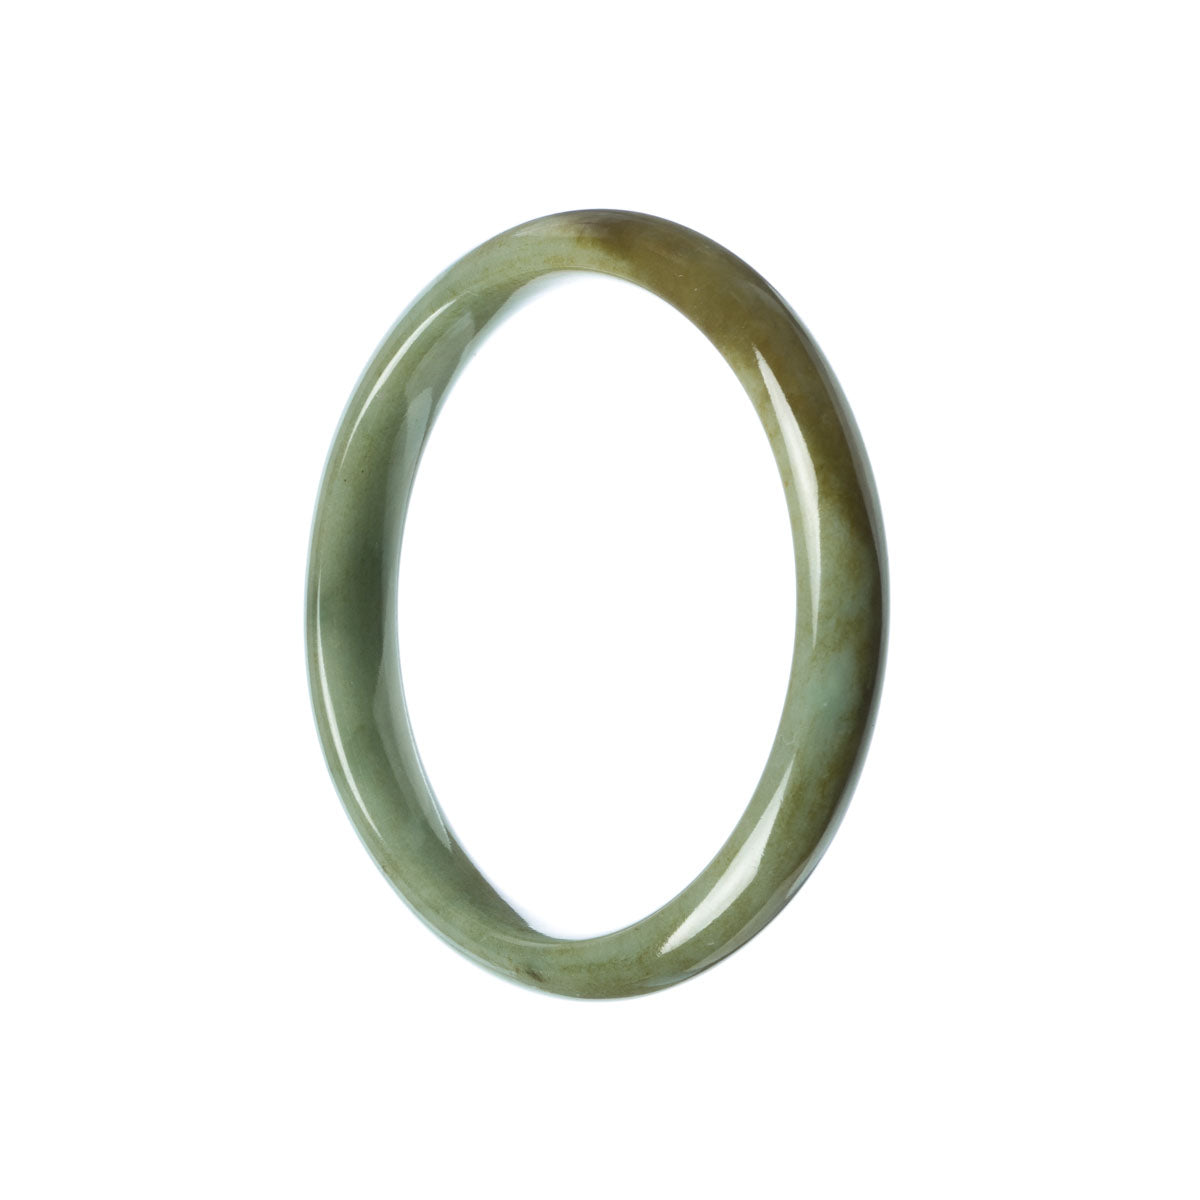 A close-up image of a beautiful green jade bangle bracelet with a half moon shape. The bracelet is made from authentic grade A traditional jade and measures 58mm in size. A stunning piece of jewelry from MAYS GEMS.